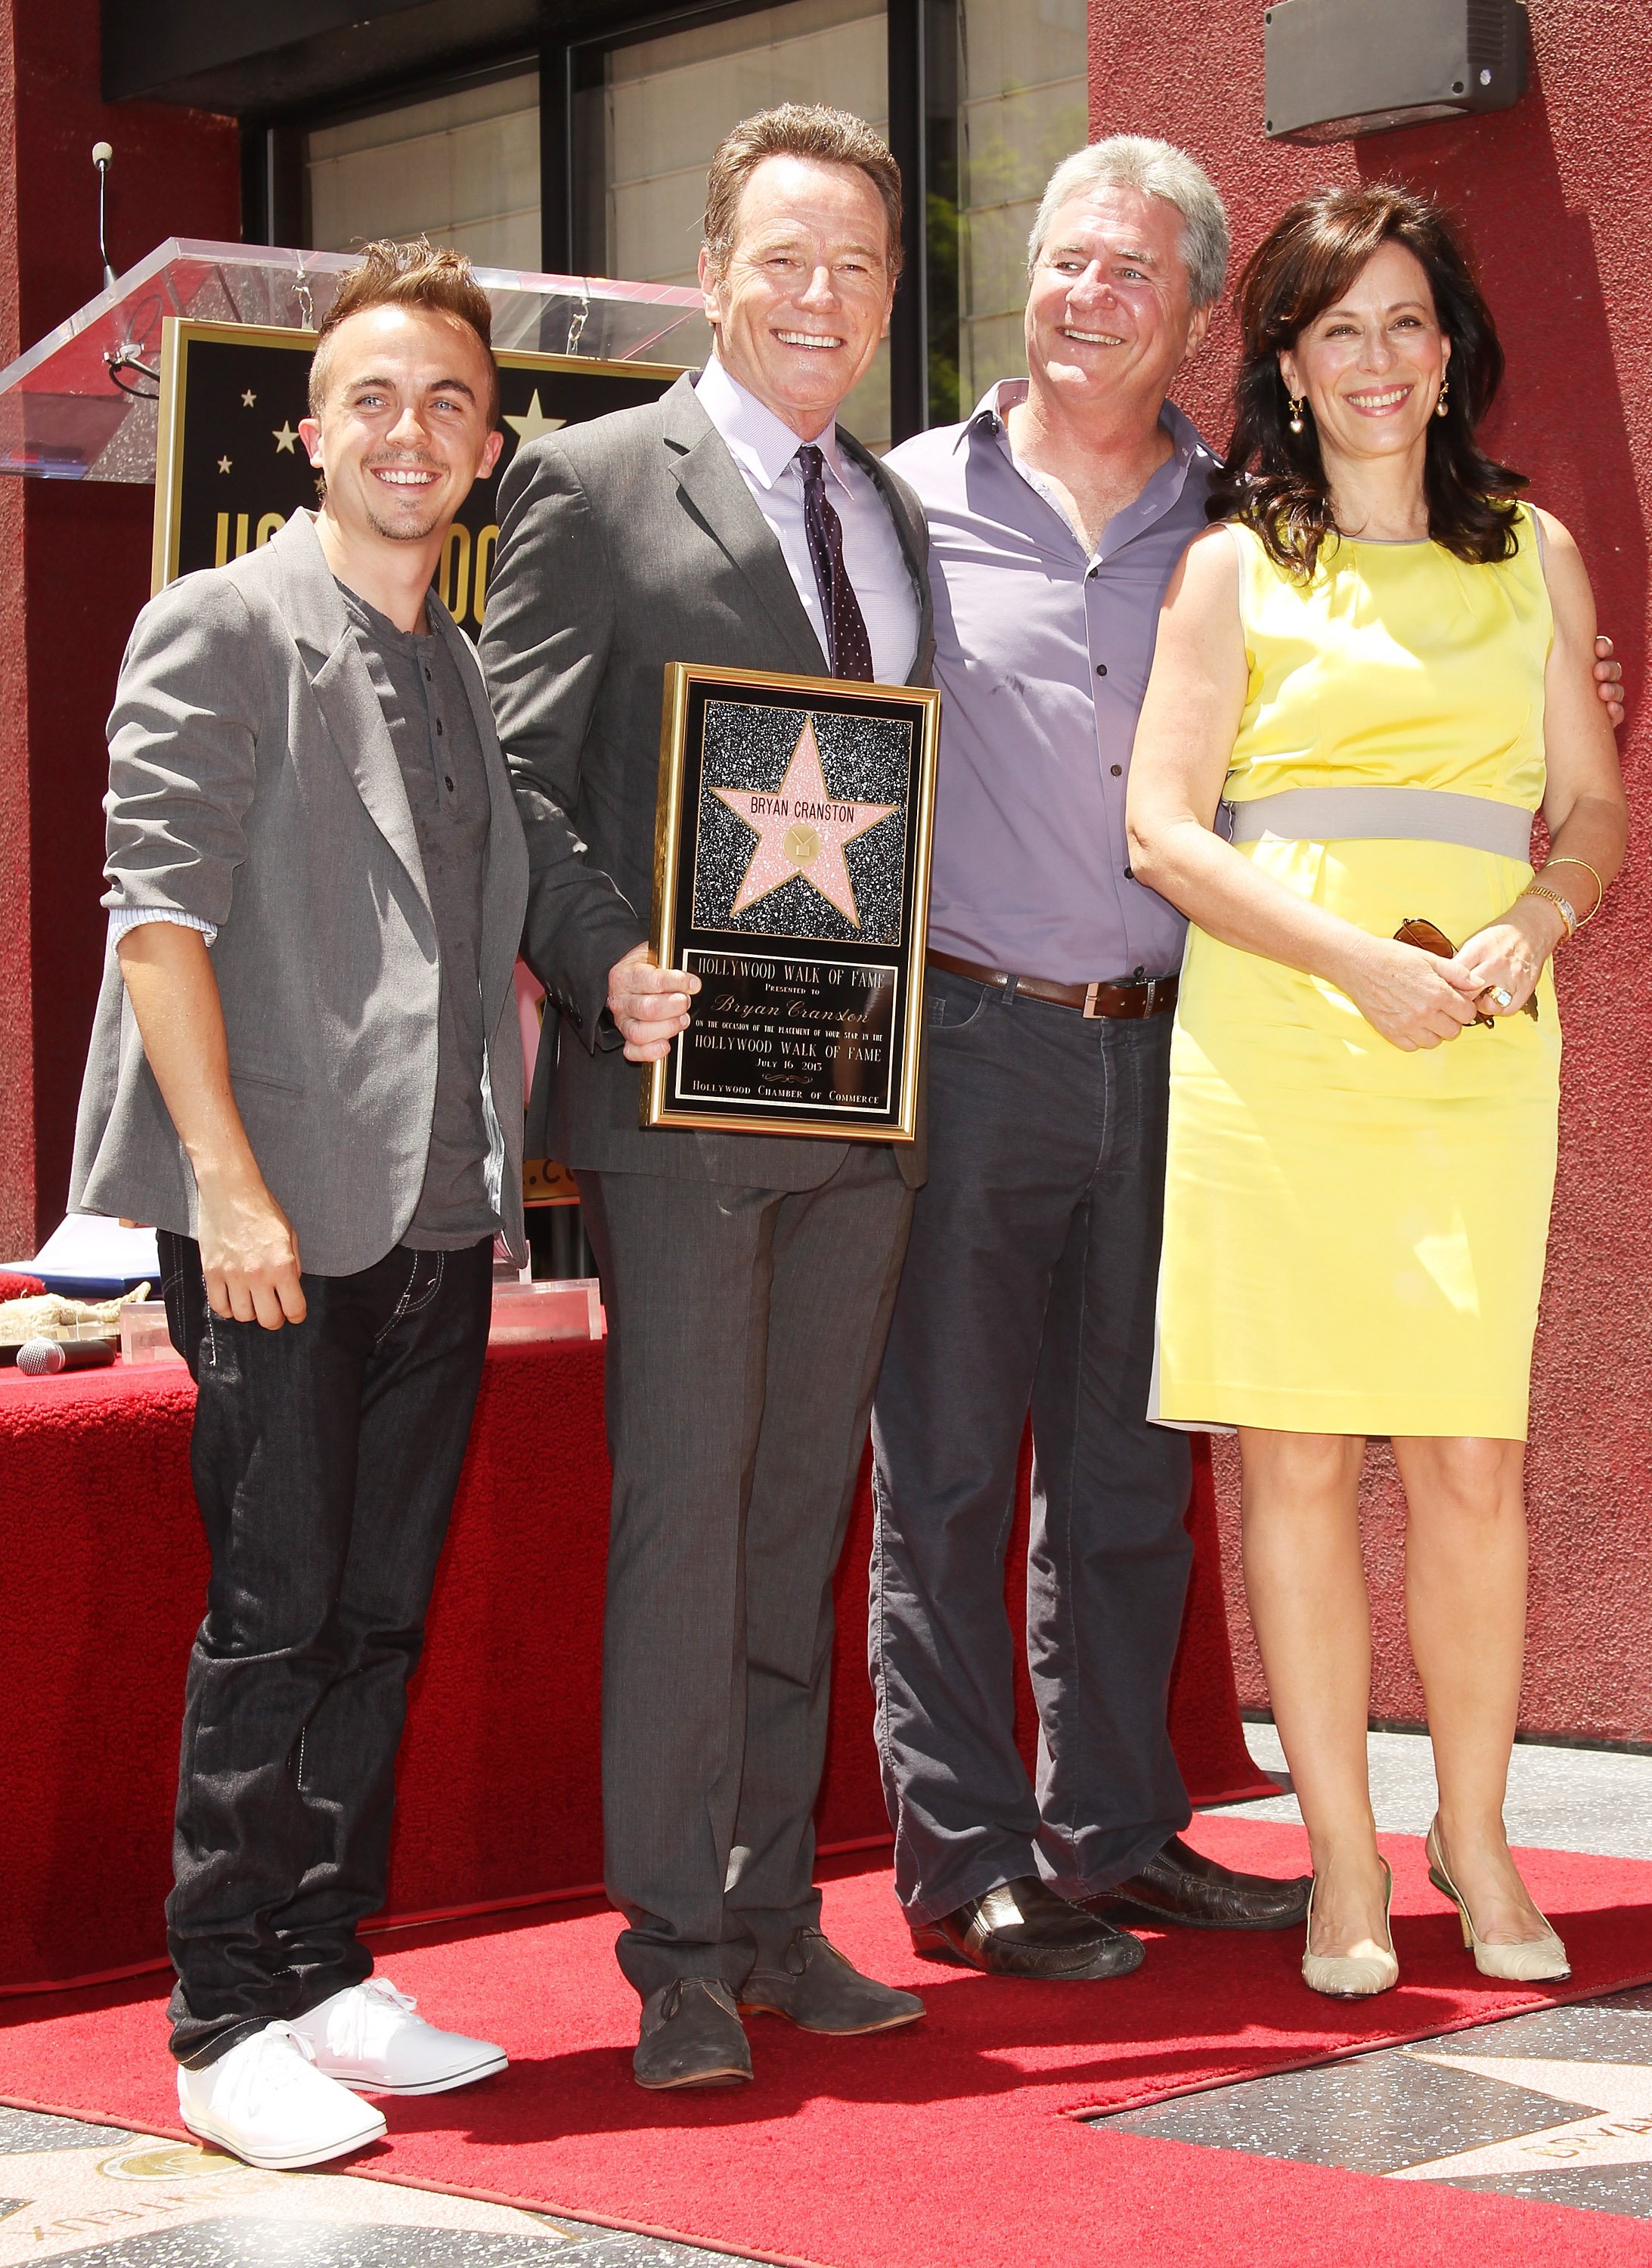 Linwood Boomer (second from right) with 'Malcolm in the Middle' stars Frankie Muniz, Bryan Cranston, and Jane Kaczmarek in 2013